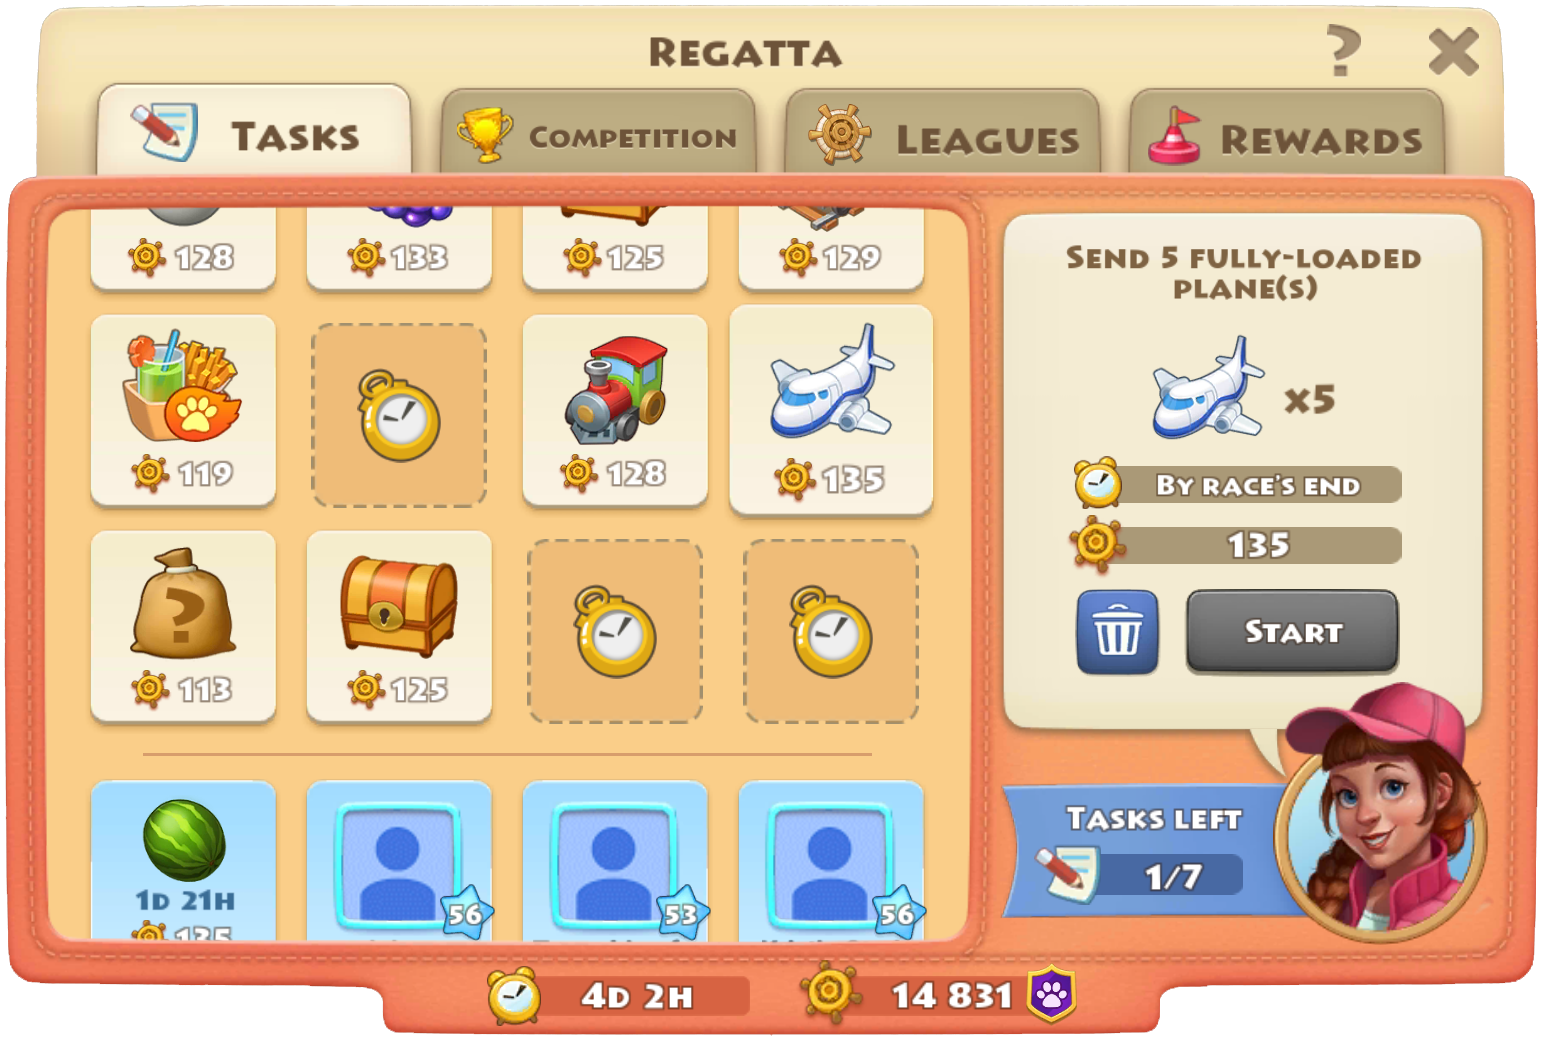 how do you get the regatta trophy in the game township